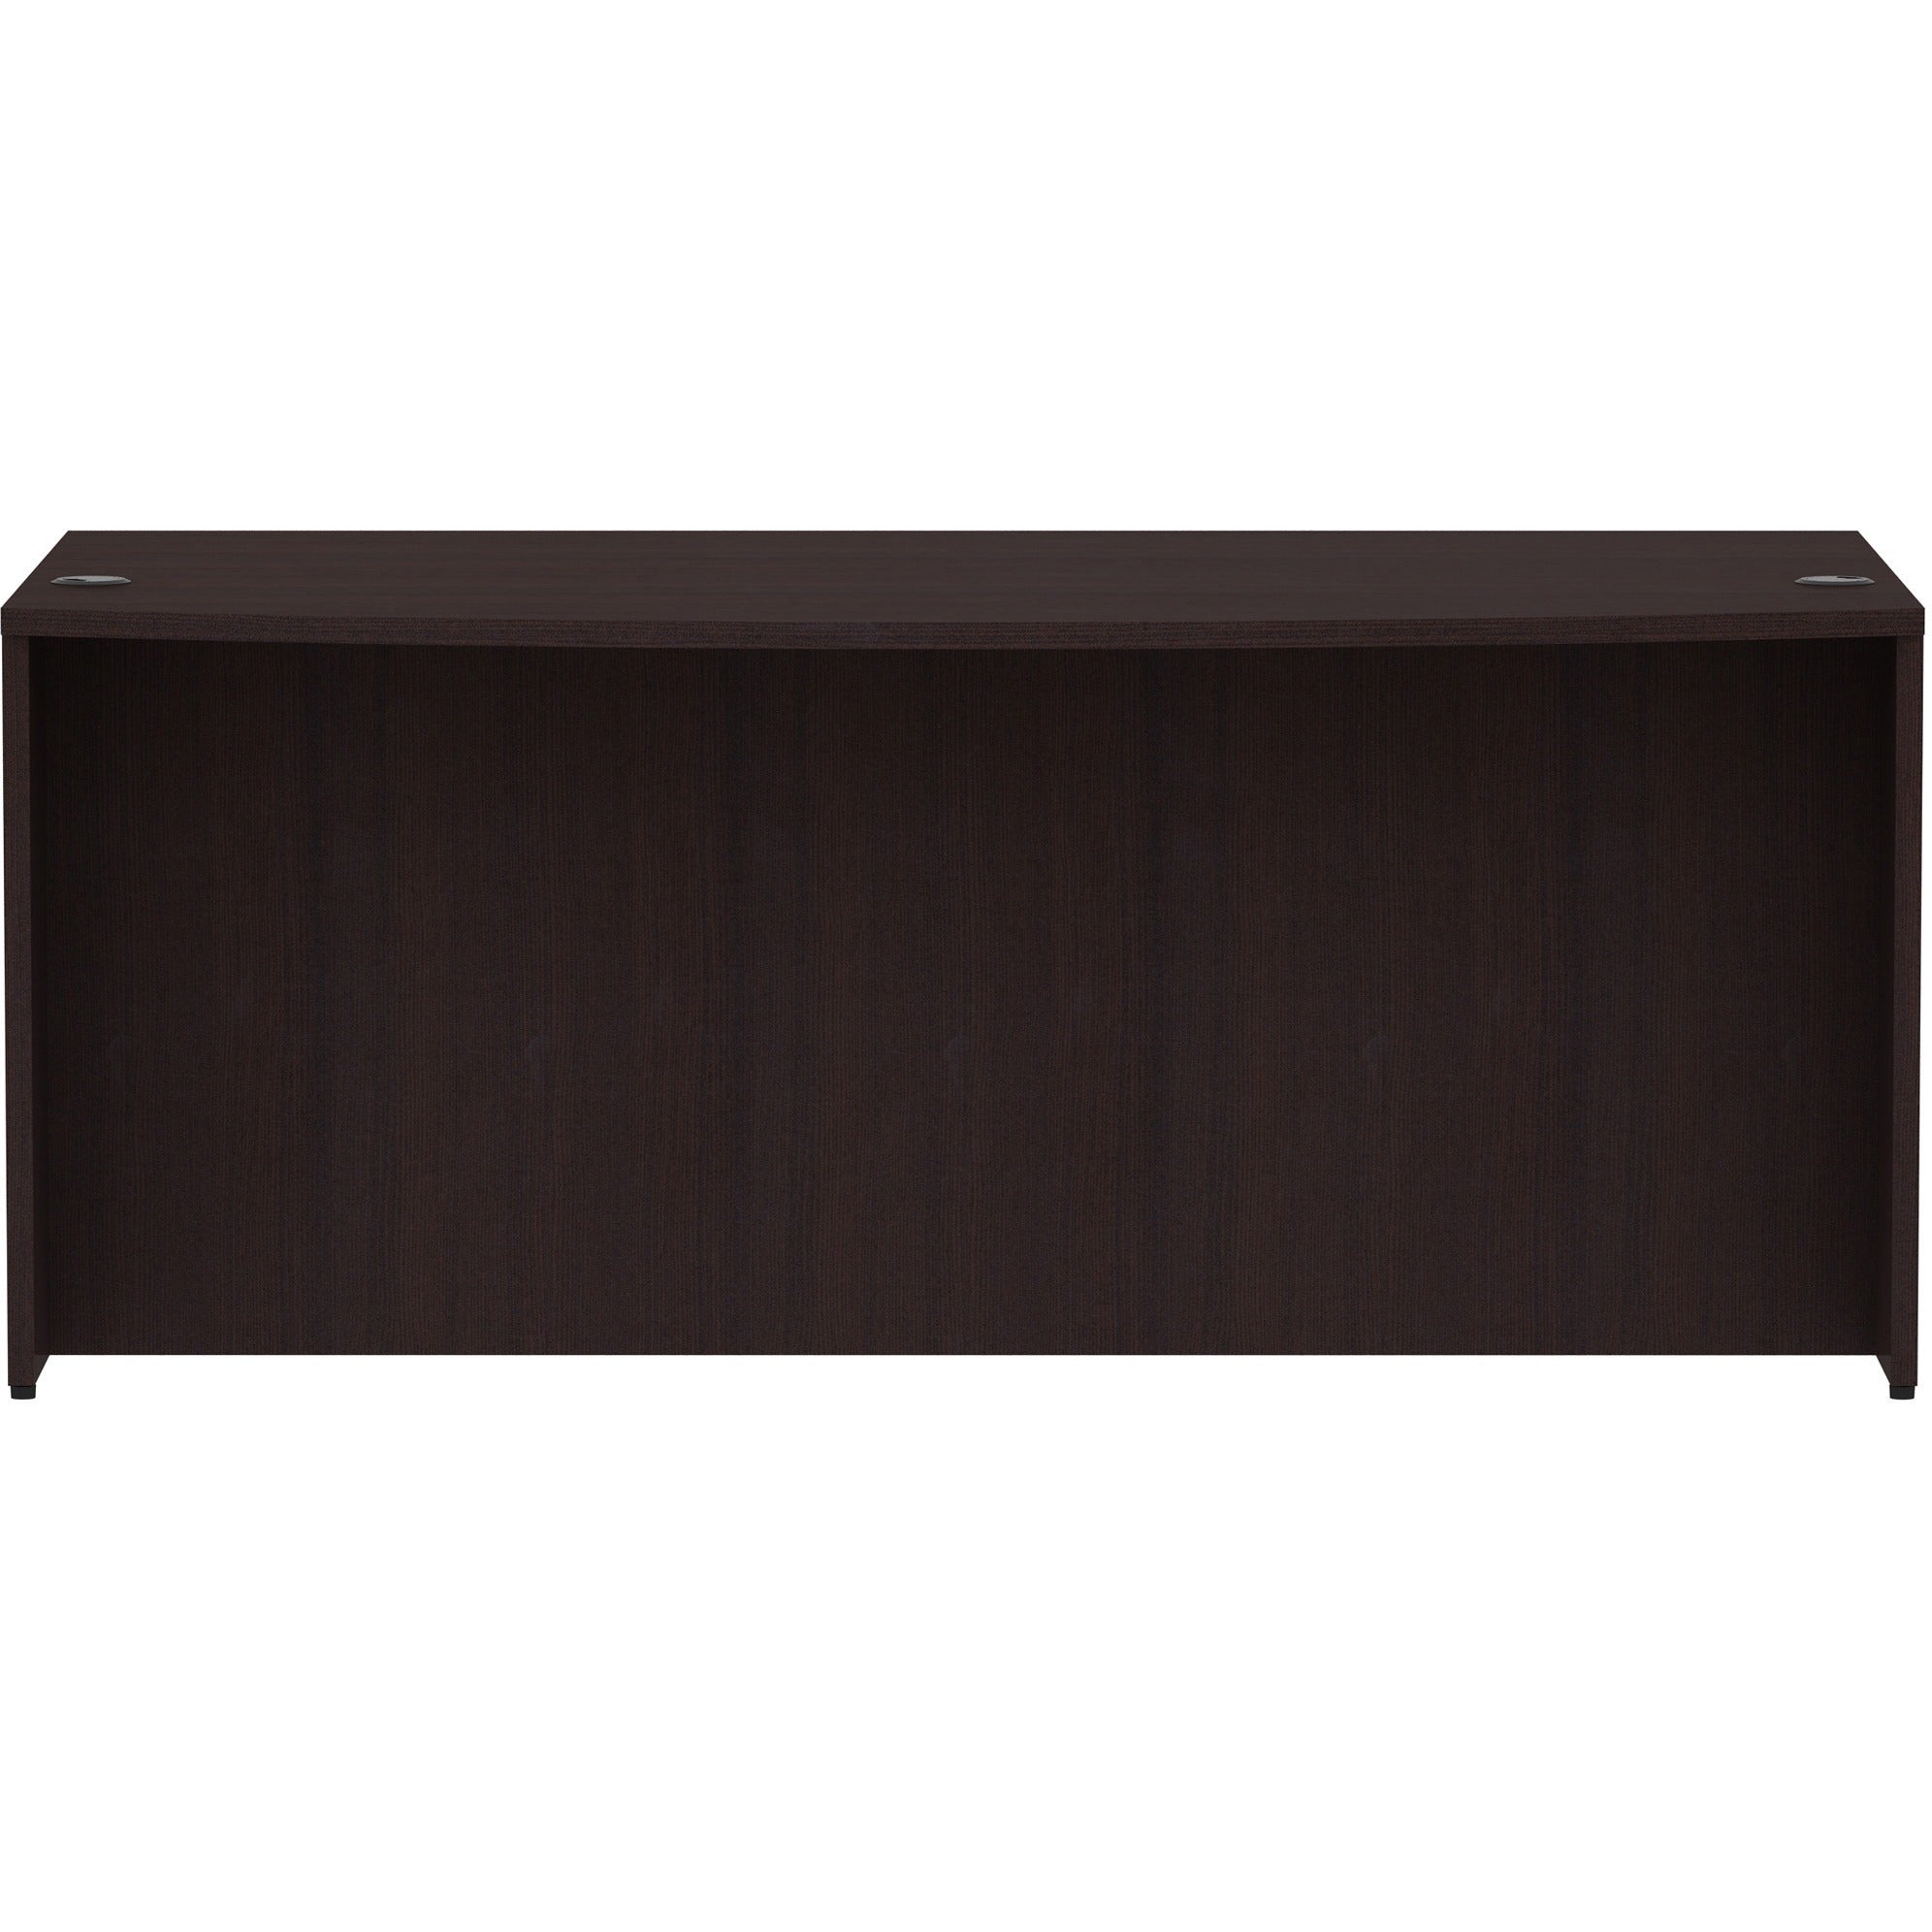 lorell-essentials-series-bowfront-desk-shell-72-x-414295-desk-shell-1-top-bow-front-edge-finish-espresso-laminate_llr18260 - 3